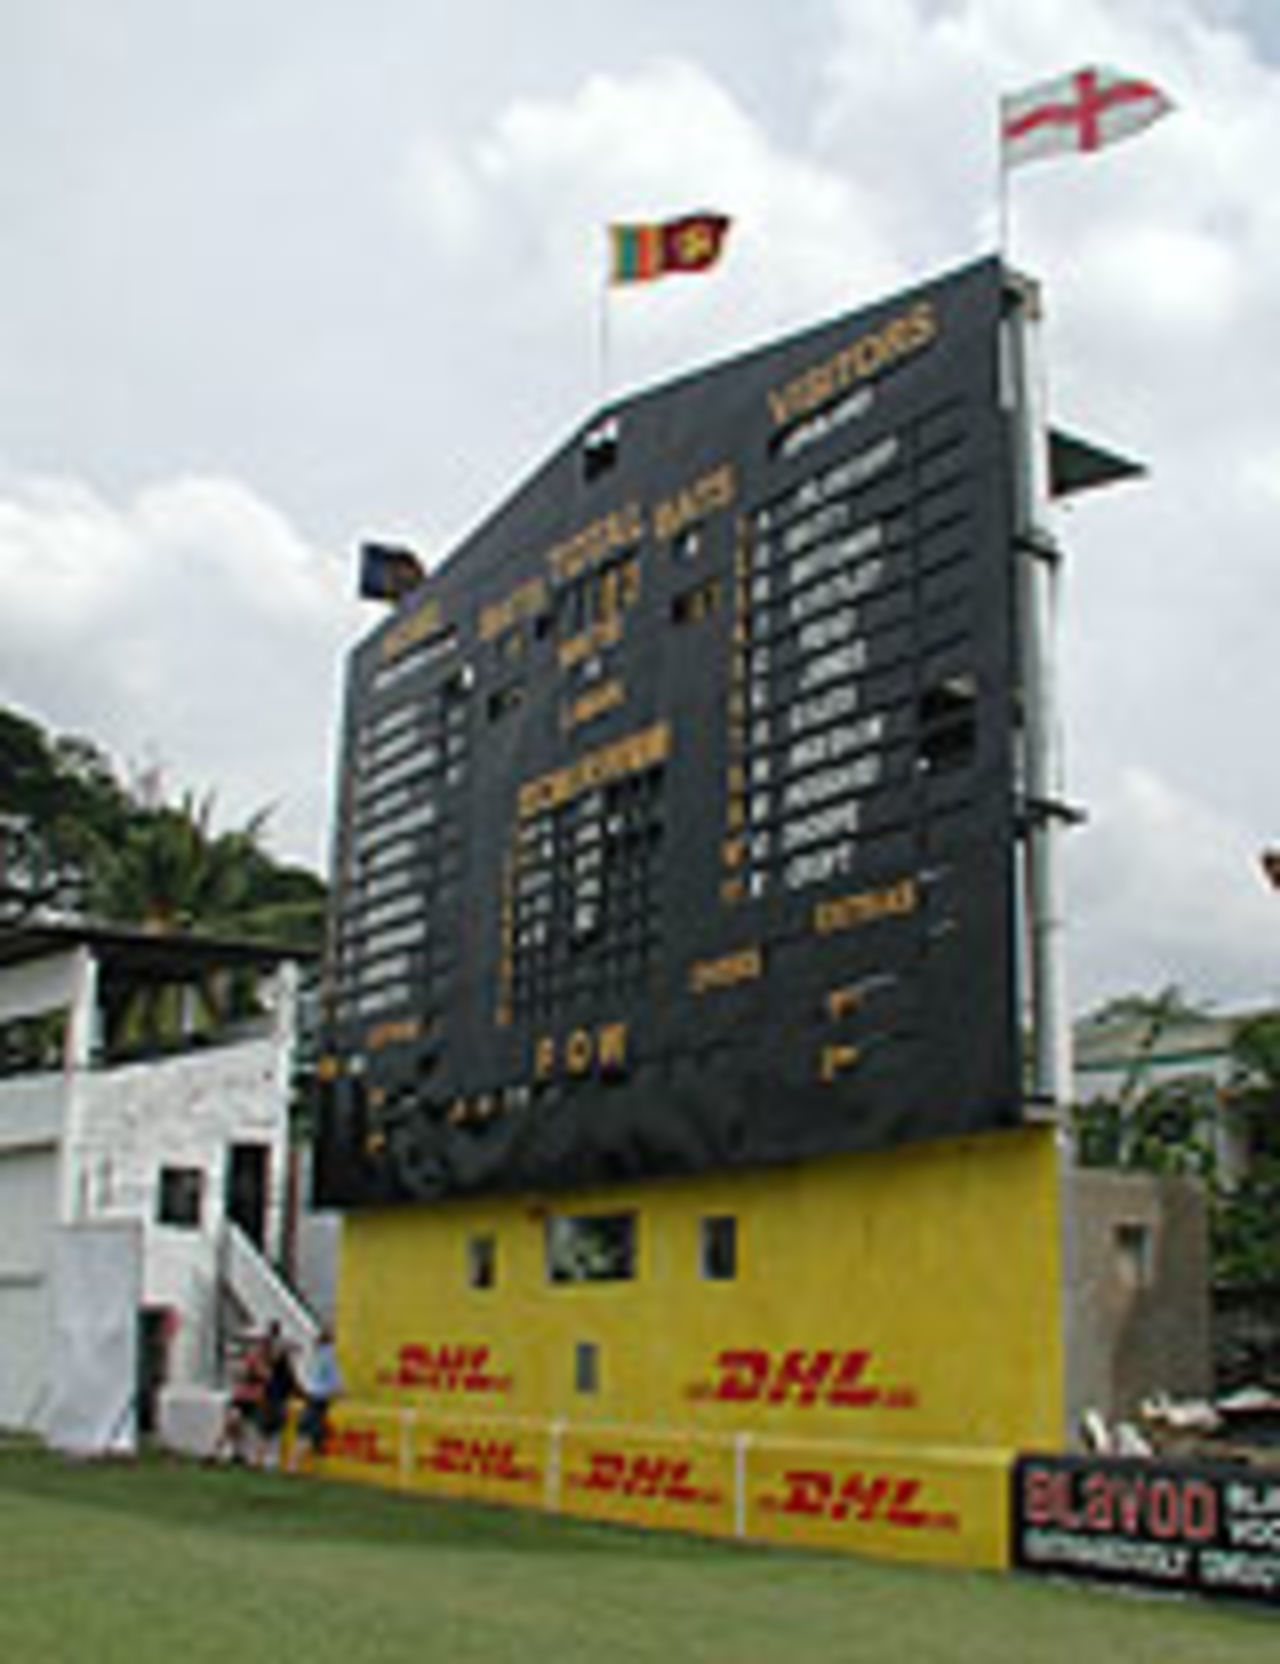 The newly unveiled scoreboard at Colombo Cricket Club 26 Nov 2003